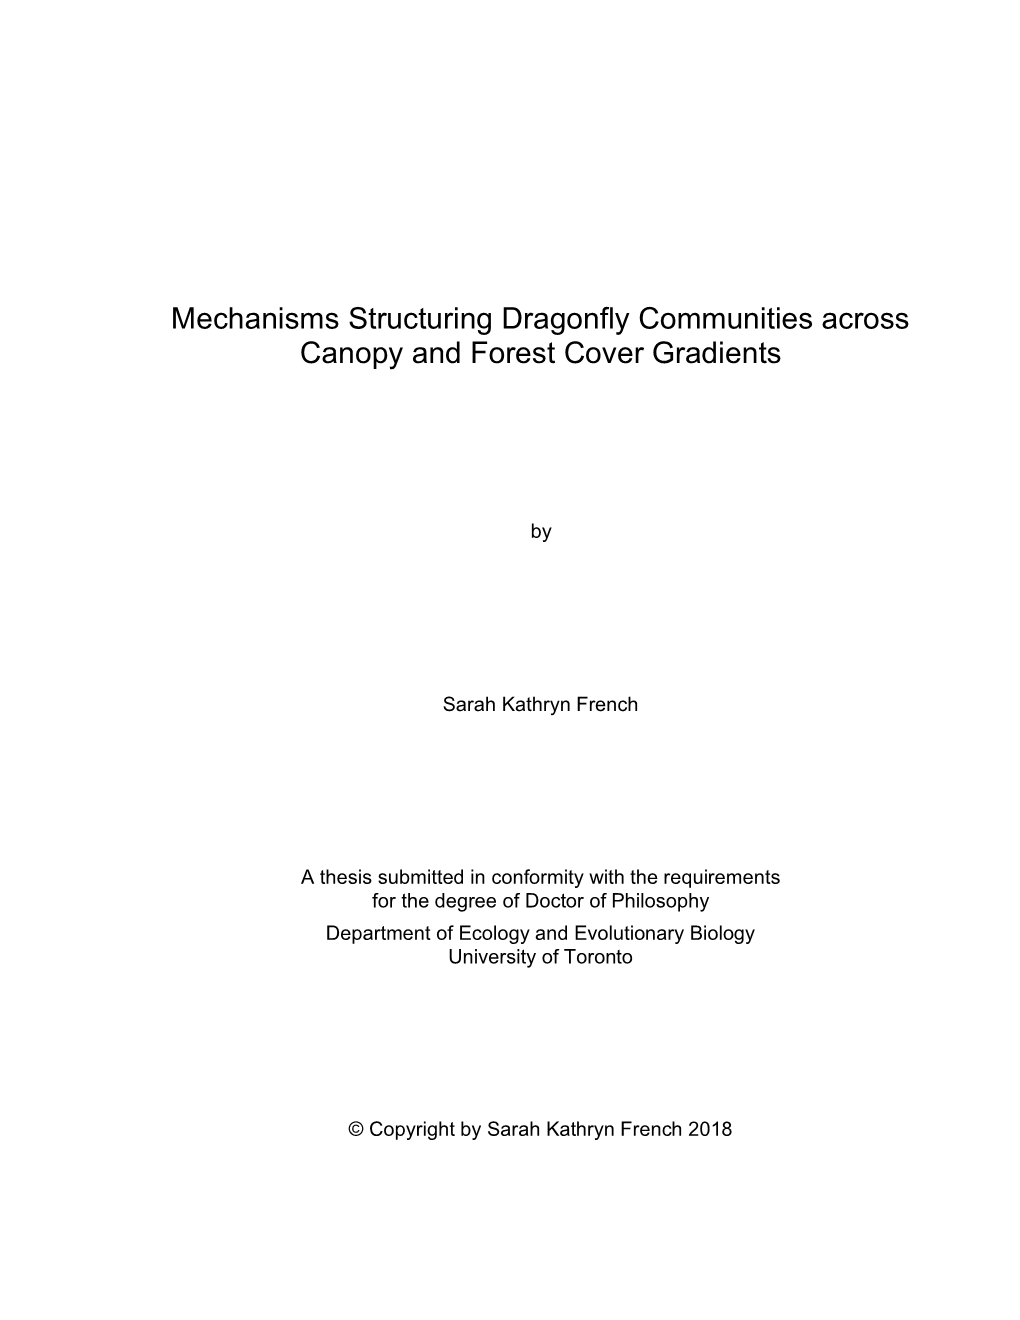 Mechanisms Structuring Dragonfly Communities Across Canopy and Forest Cover Gradients